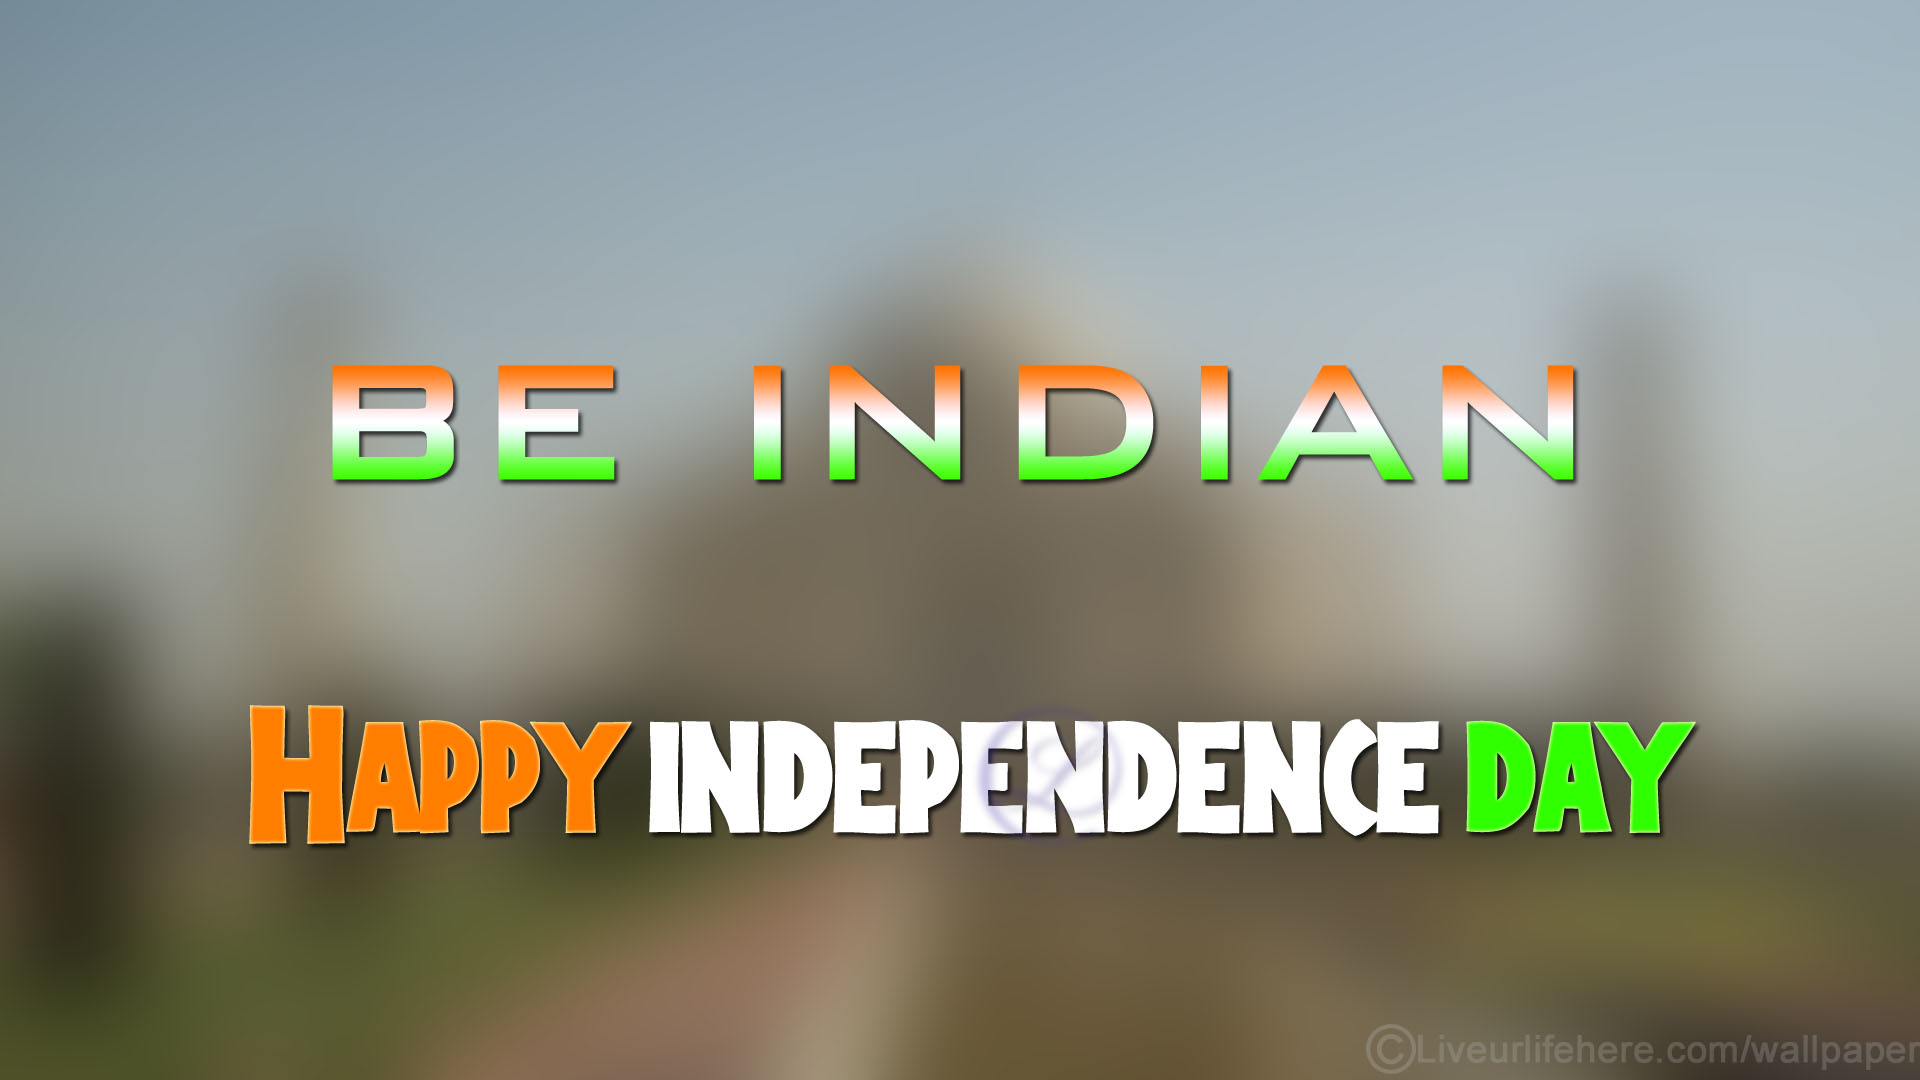 Independence Day Image 2021 Download August Wallpaper, Picture, Pics Friendship Day Status 2021